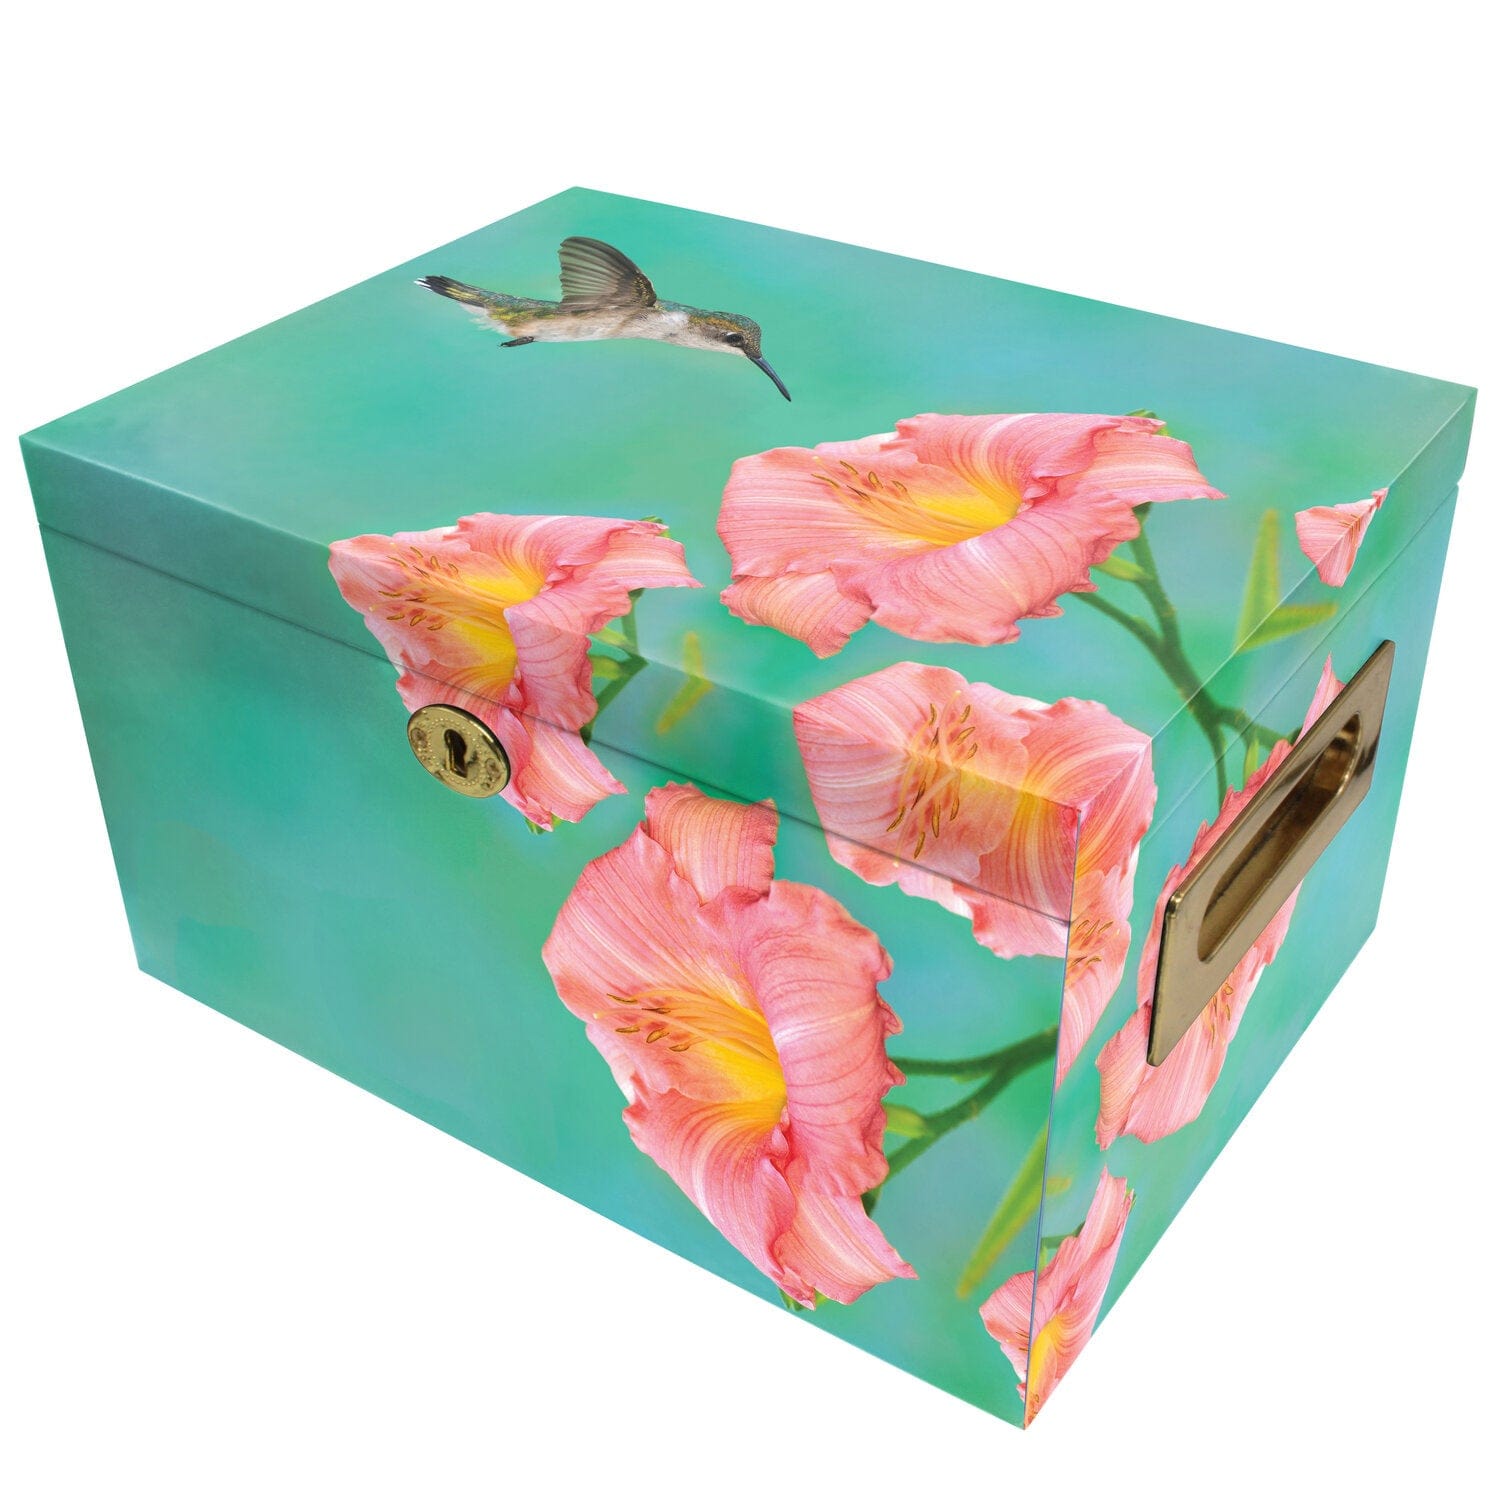 Commemorative Cremation Urns Urn Collection Chest Floating Hummingbird Memorial Collection Chest Cremation Urn